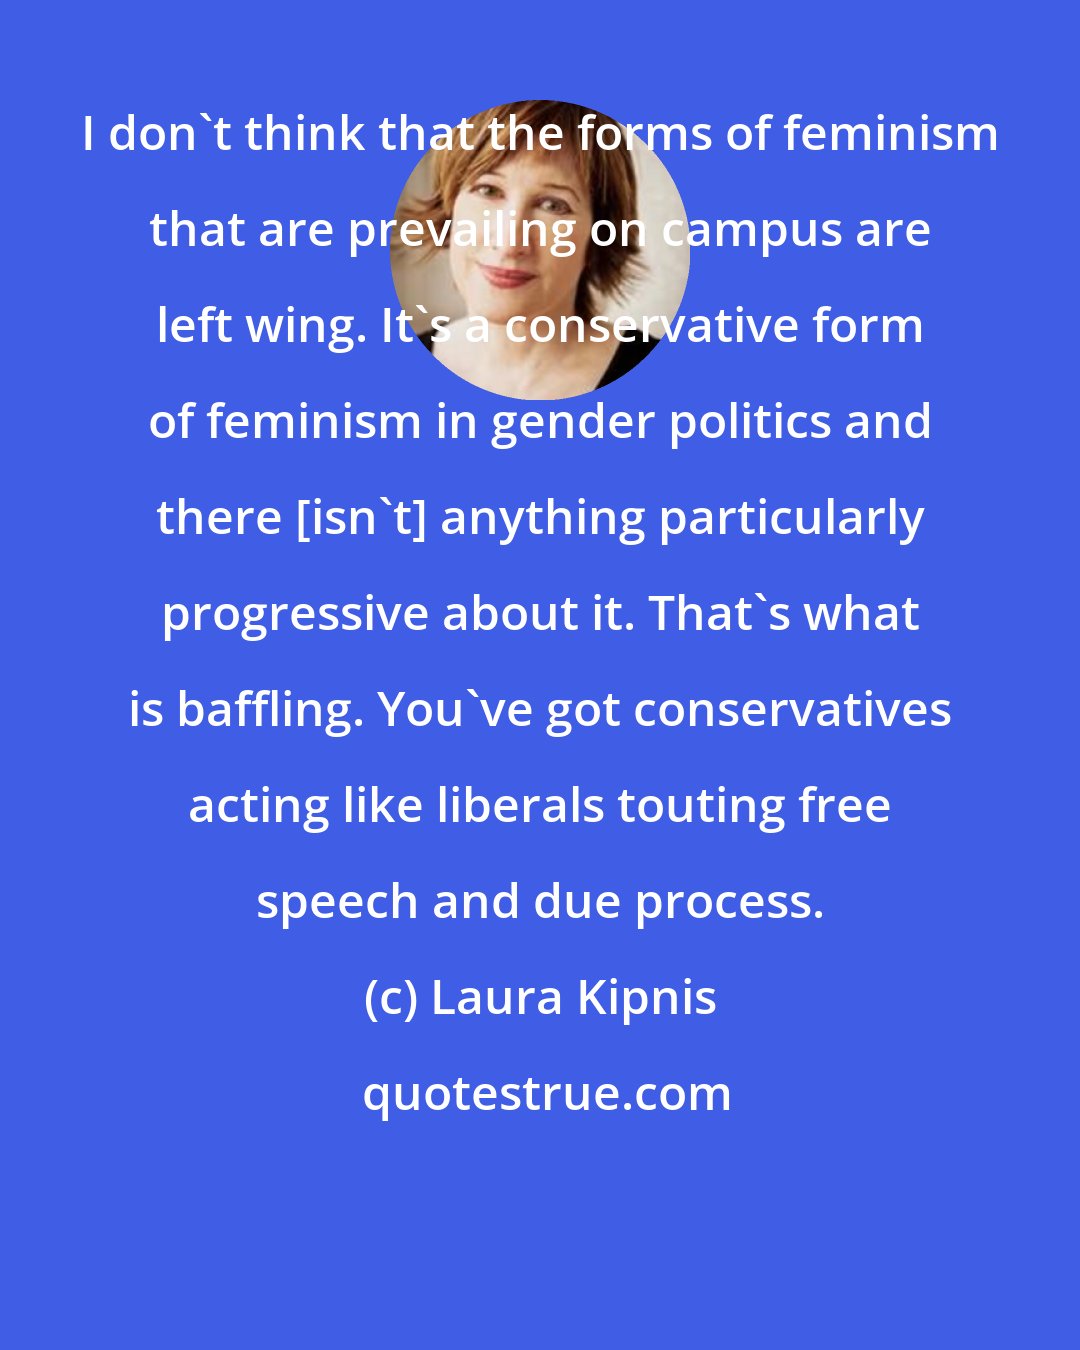 Laura Kipnis: I don't think that the forms of feminism that are prevailing on campus are left wing. It's a conservative form of feminism in gender politics and there [isn't] anything particularly progressive about it. That's what is baffling. You've got conservatives acting like liberals touting free speech and due process.